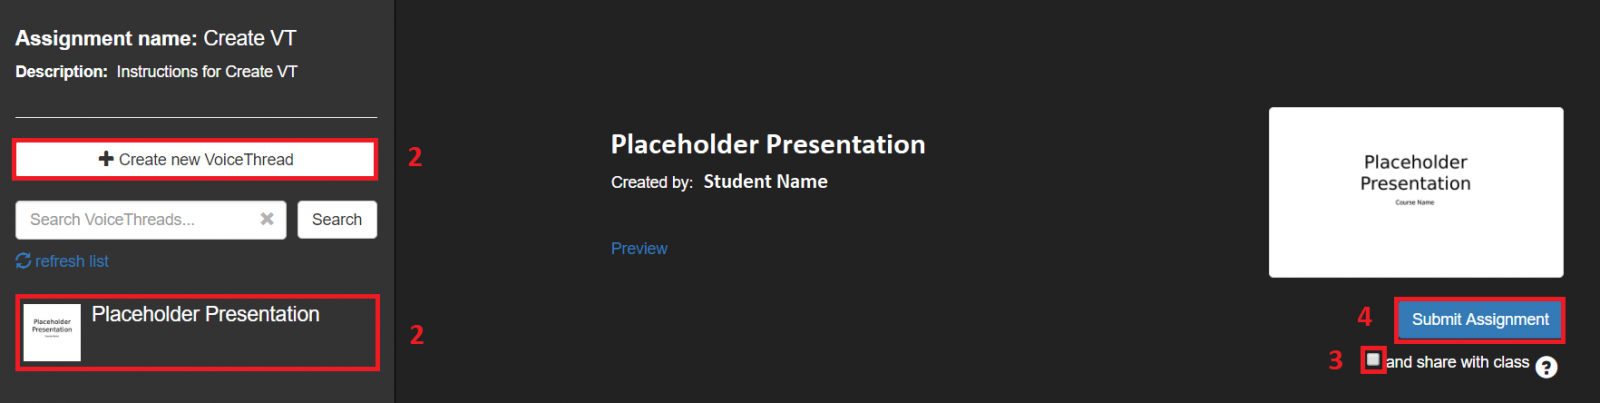 Screenshot of student submission page for a create a VoiceThread assignment.